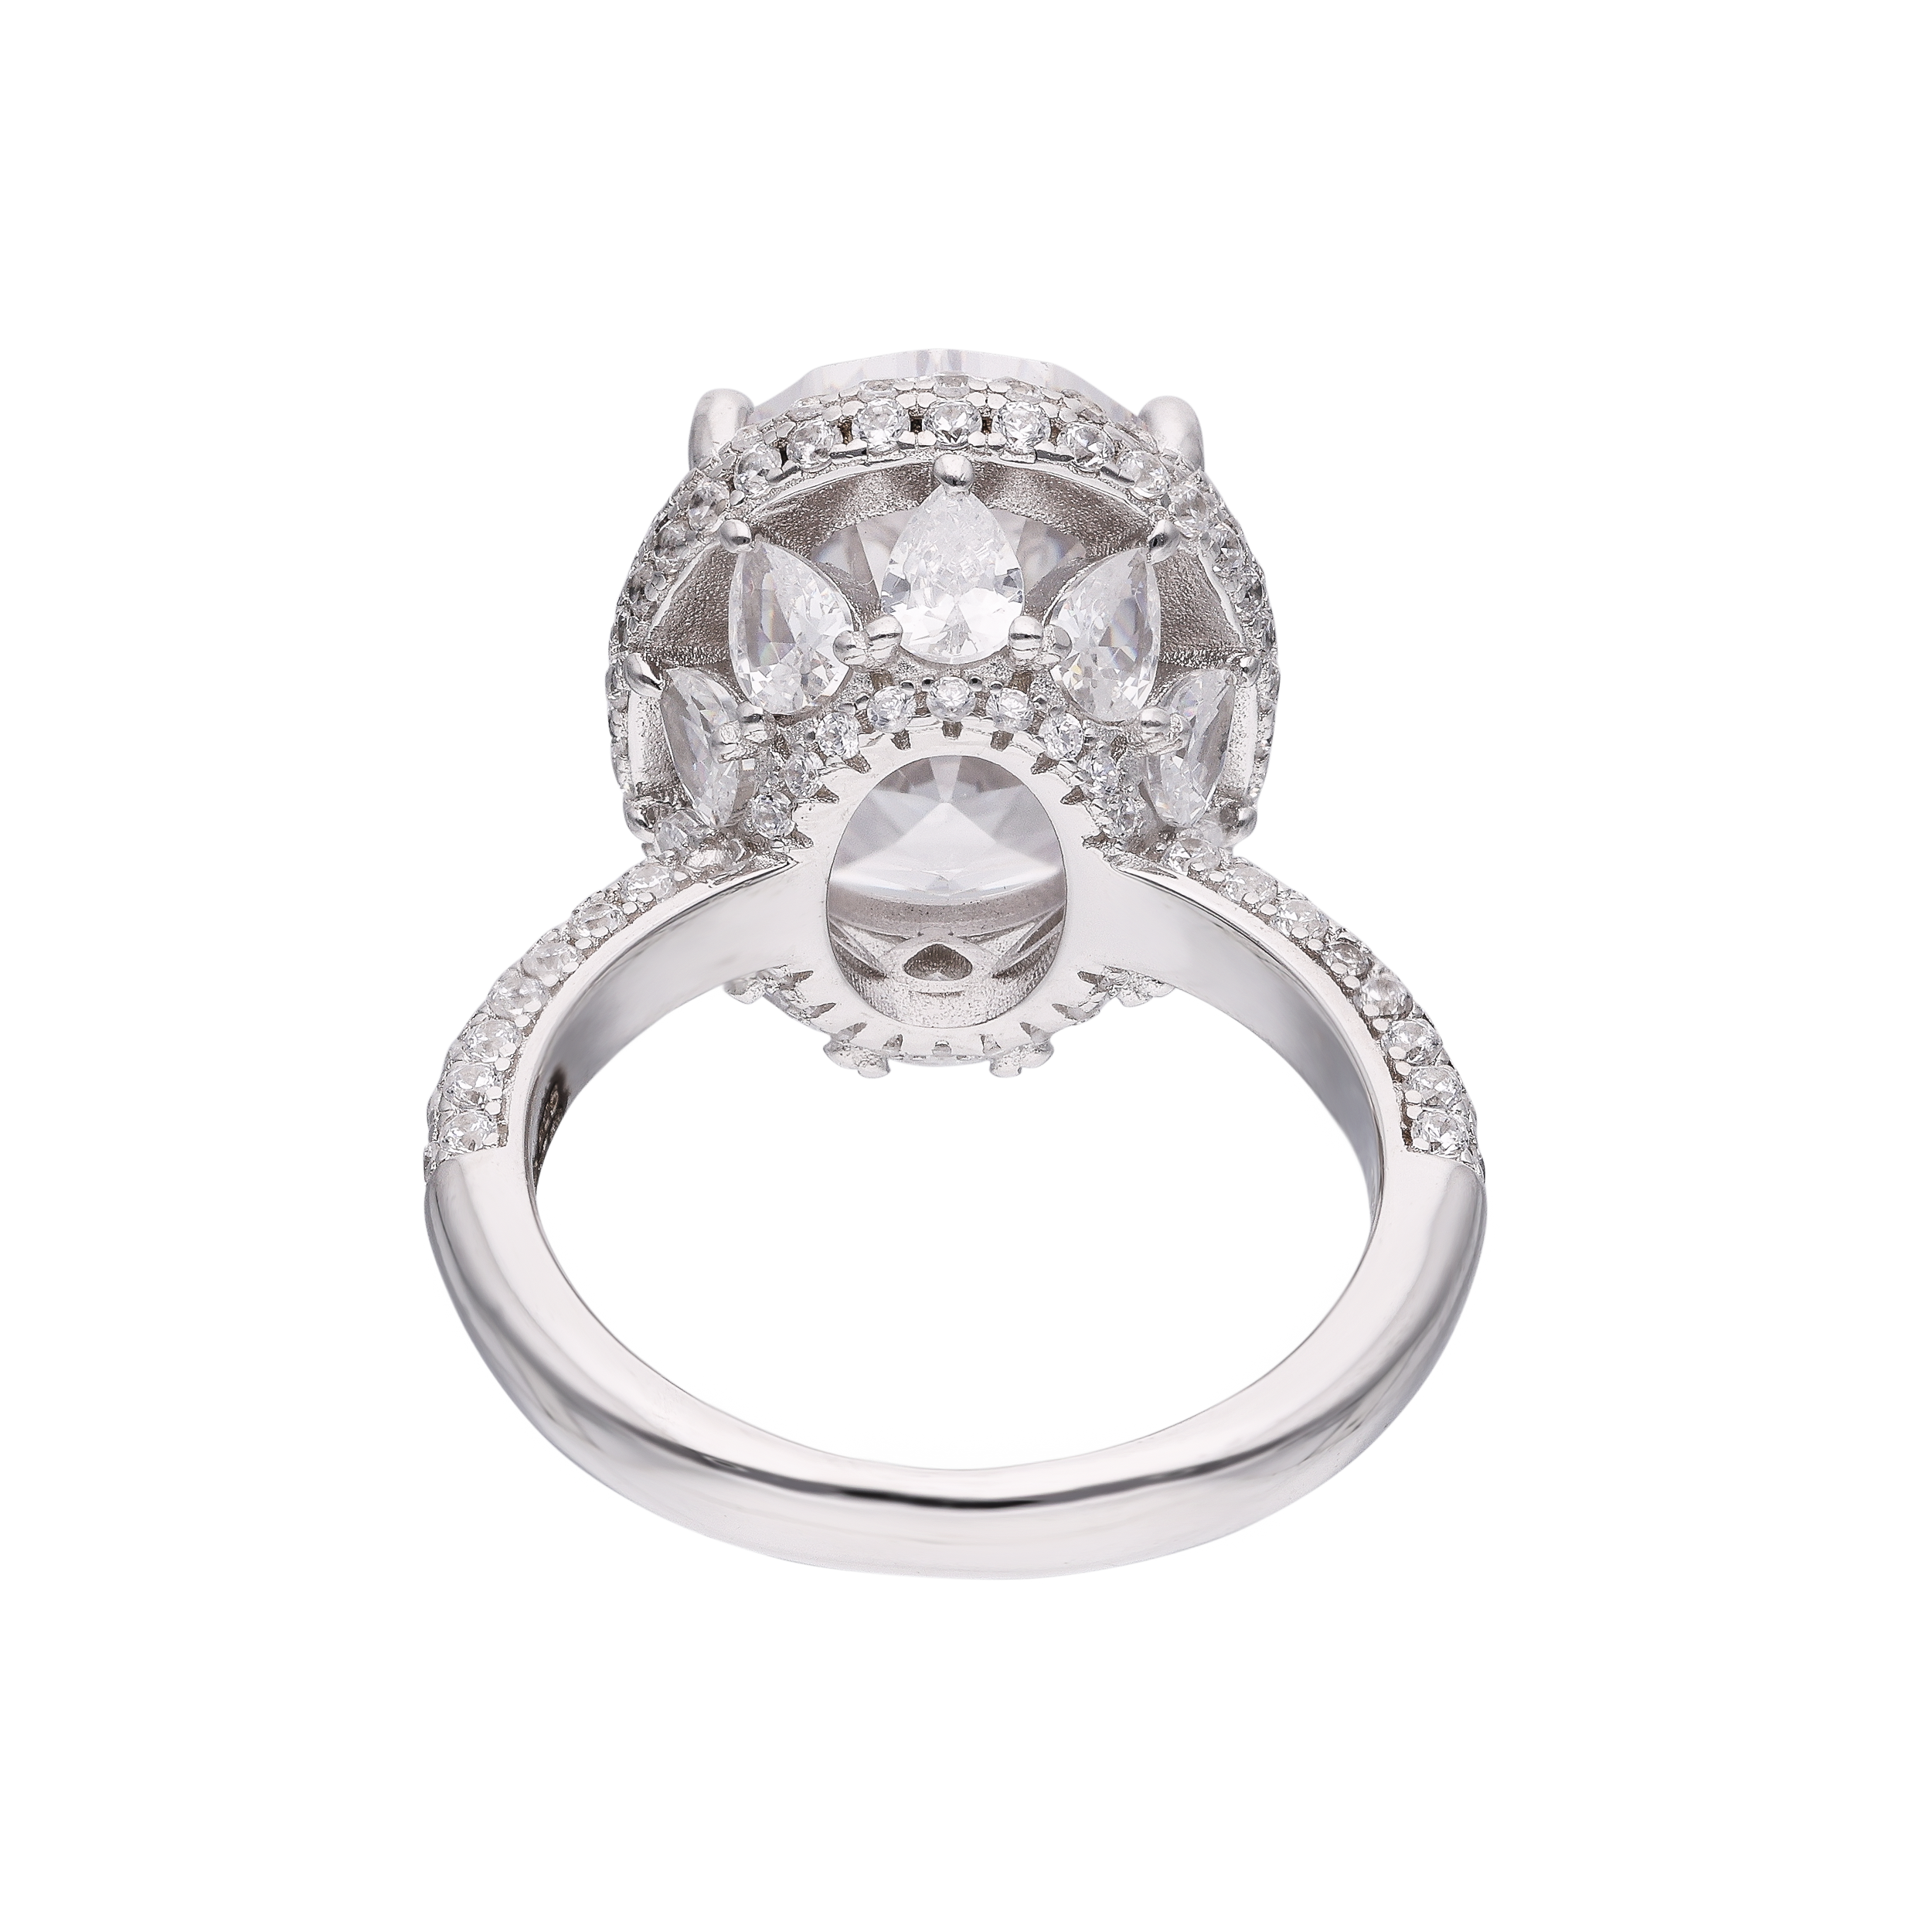 Sterling Silver Ring & Cubic Zirconia Statement | SKU: 0002931302